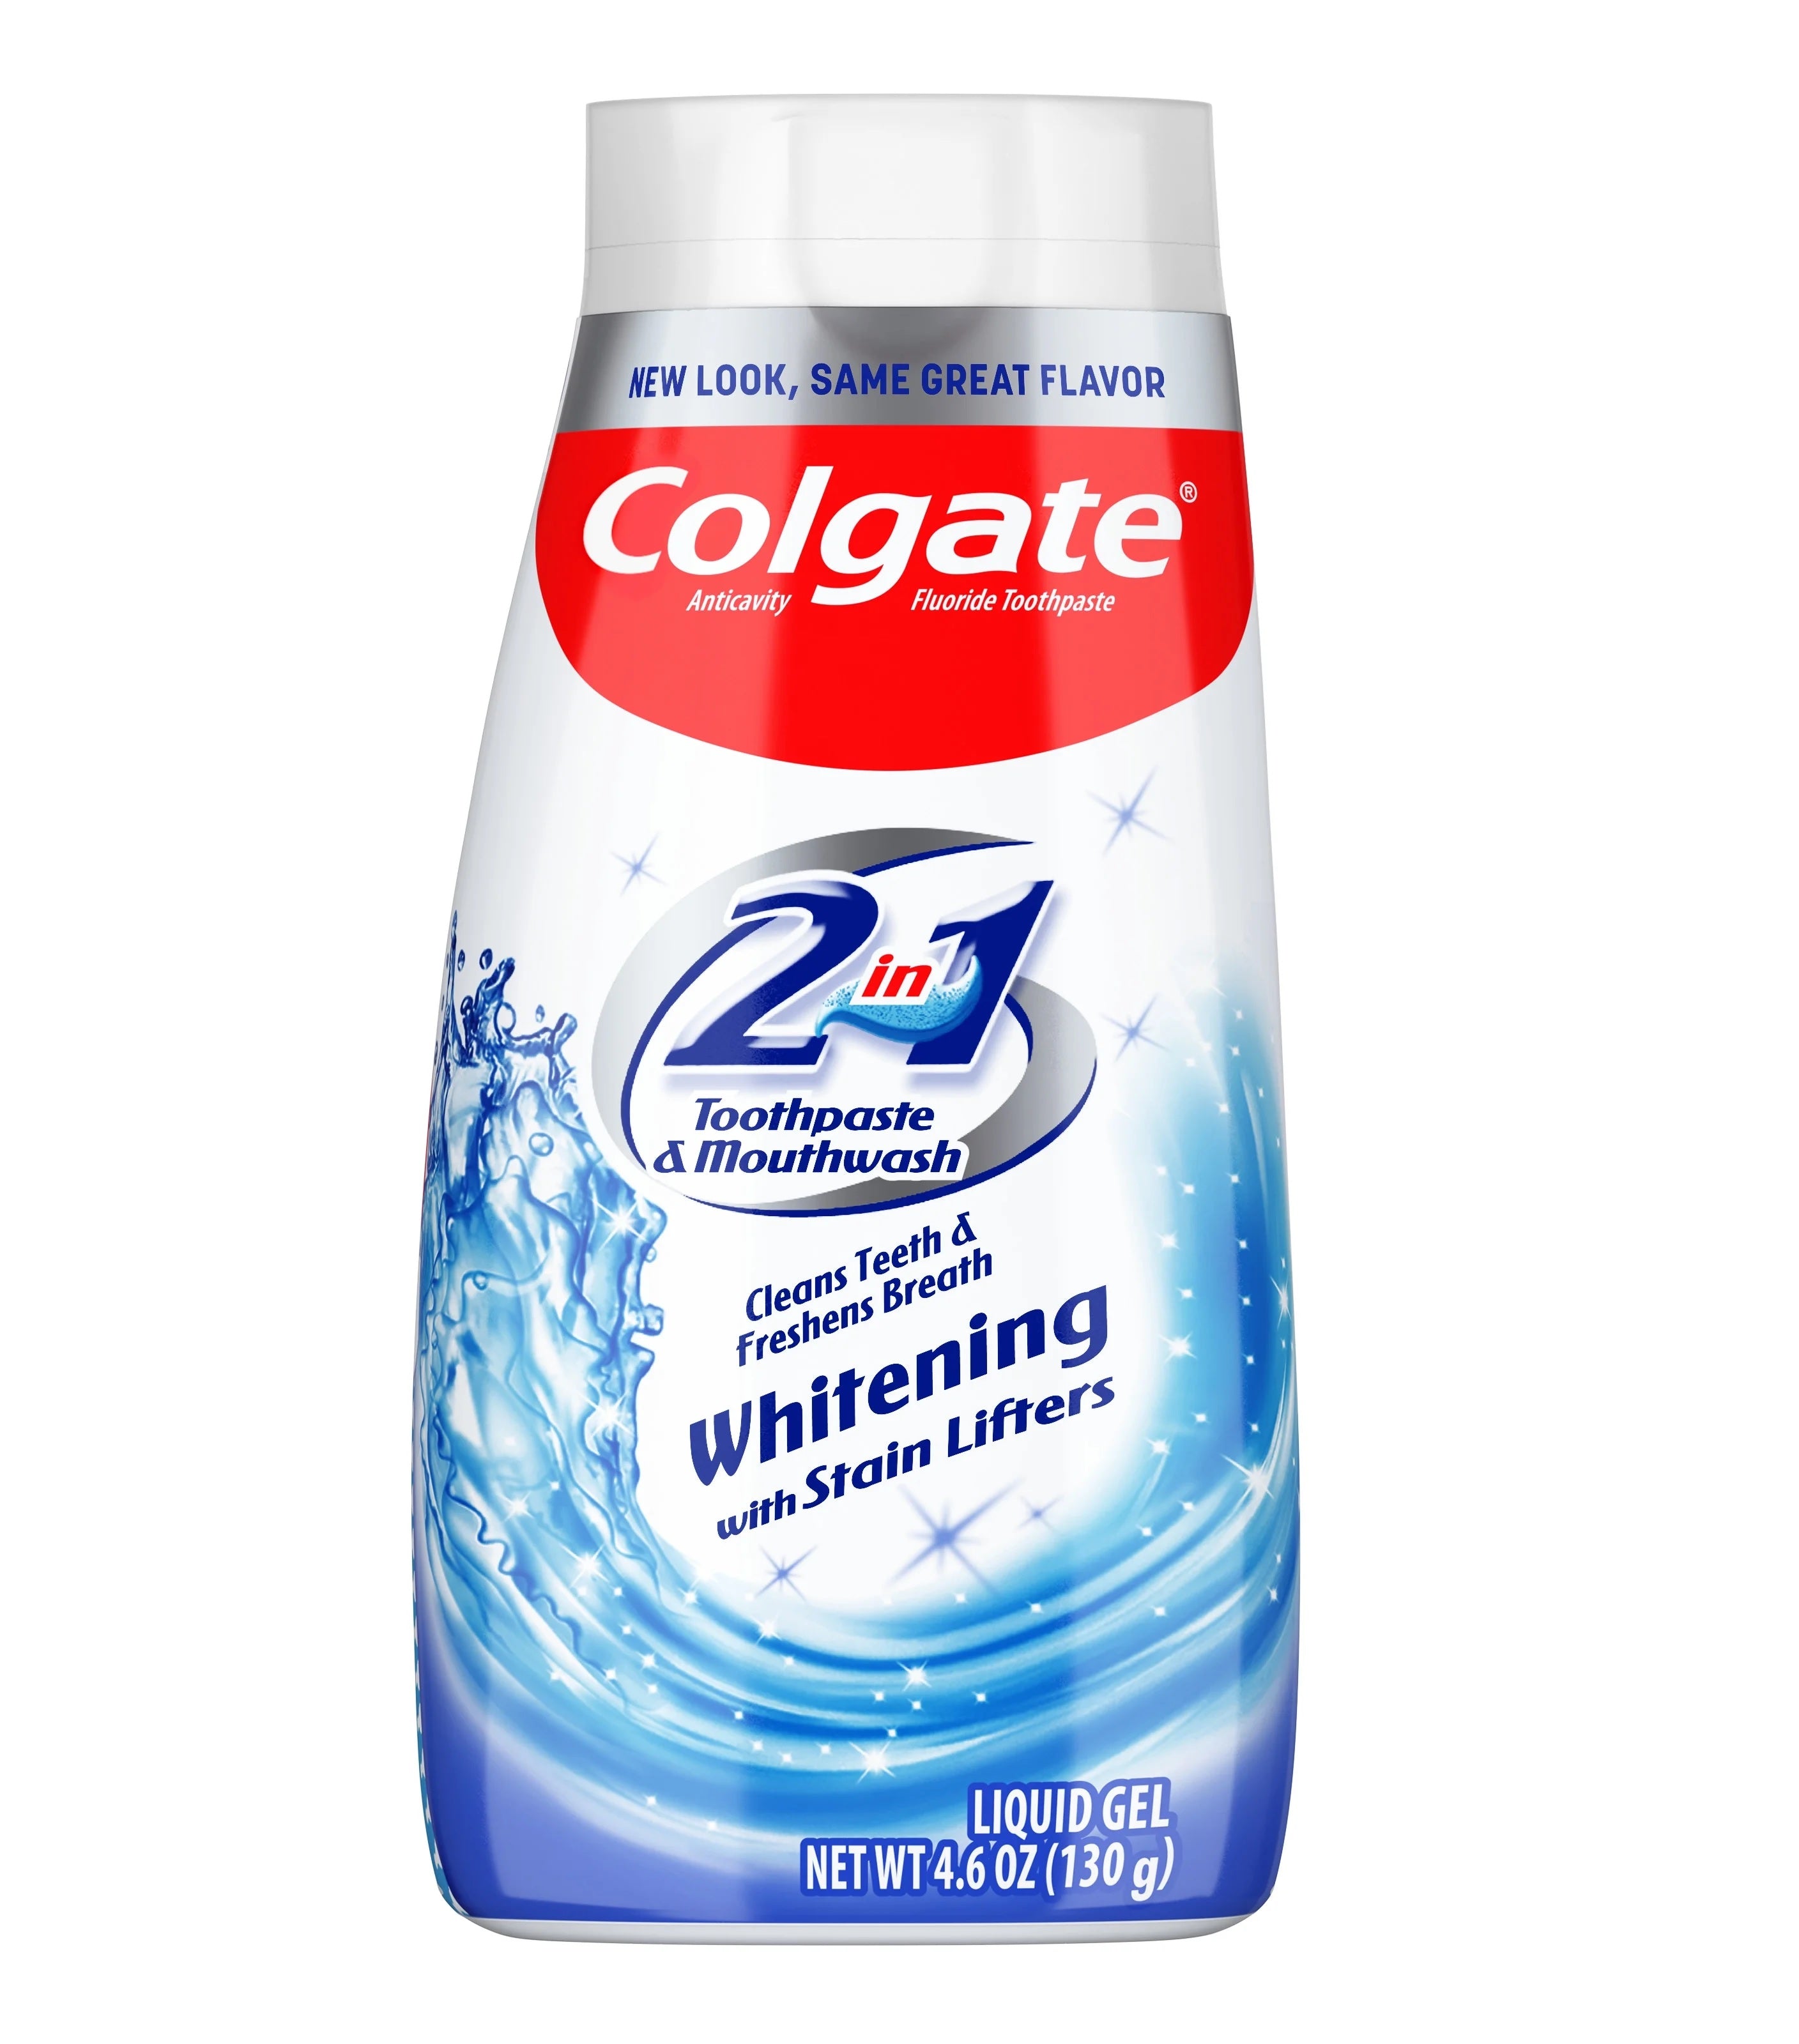 Colgate 2-in-1 Toothpaste & Mouthwash Whitening Stain Lifters - 4.6oz/12pk